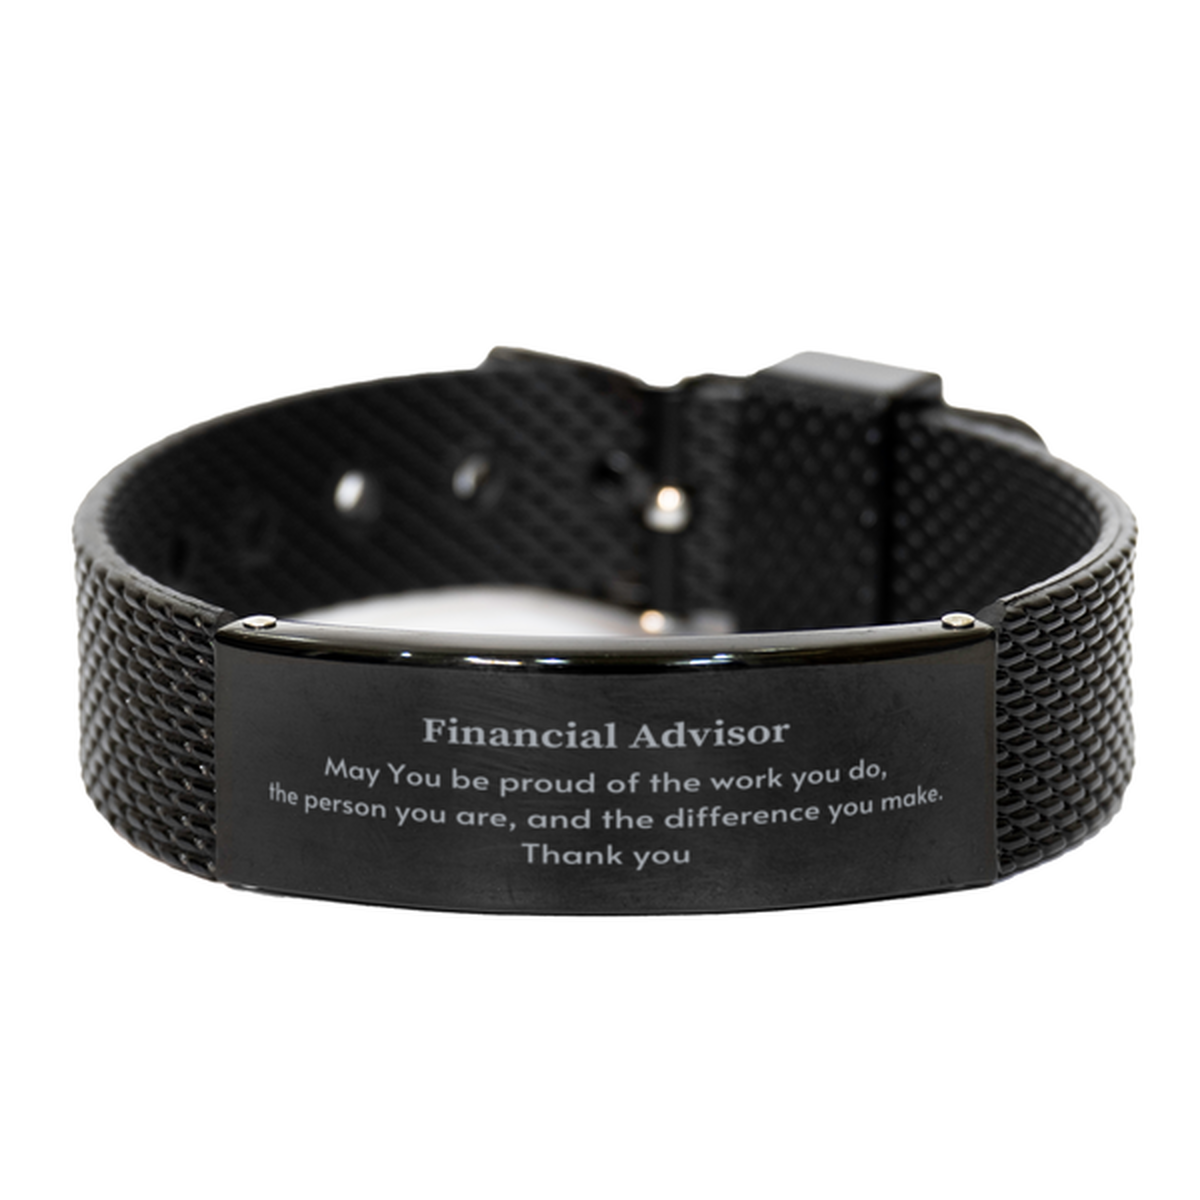 Heartwarming Black Shark Mesh Bracelet Retirement Coworkers Gifts for Financial Advisor, Financial Advisor May You be proud of the work you do, the person you are Gifts for Boss Men Women Friends